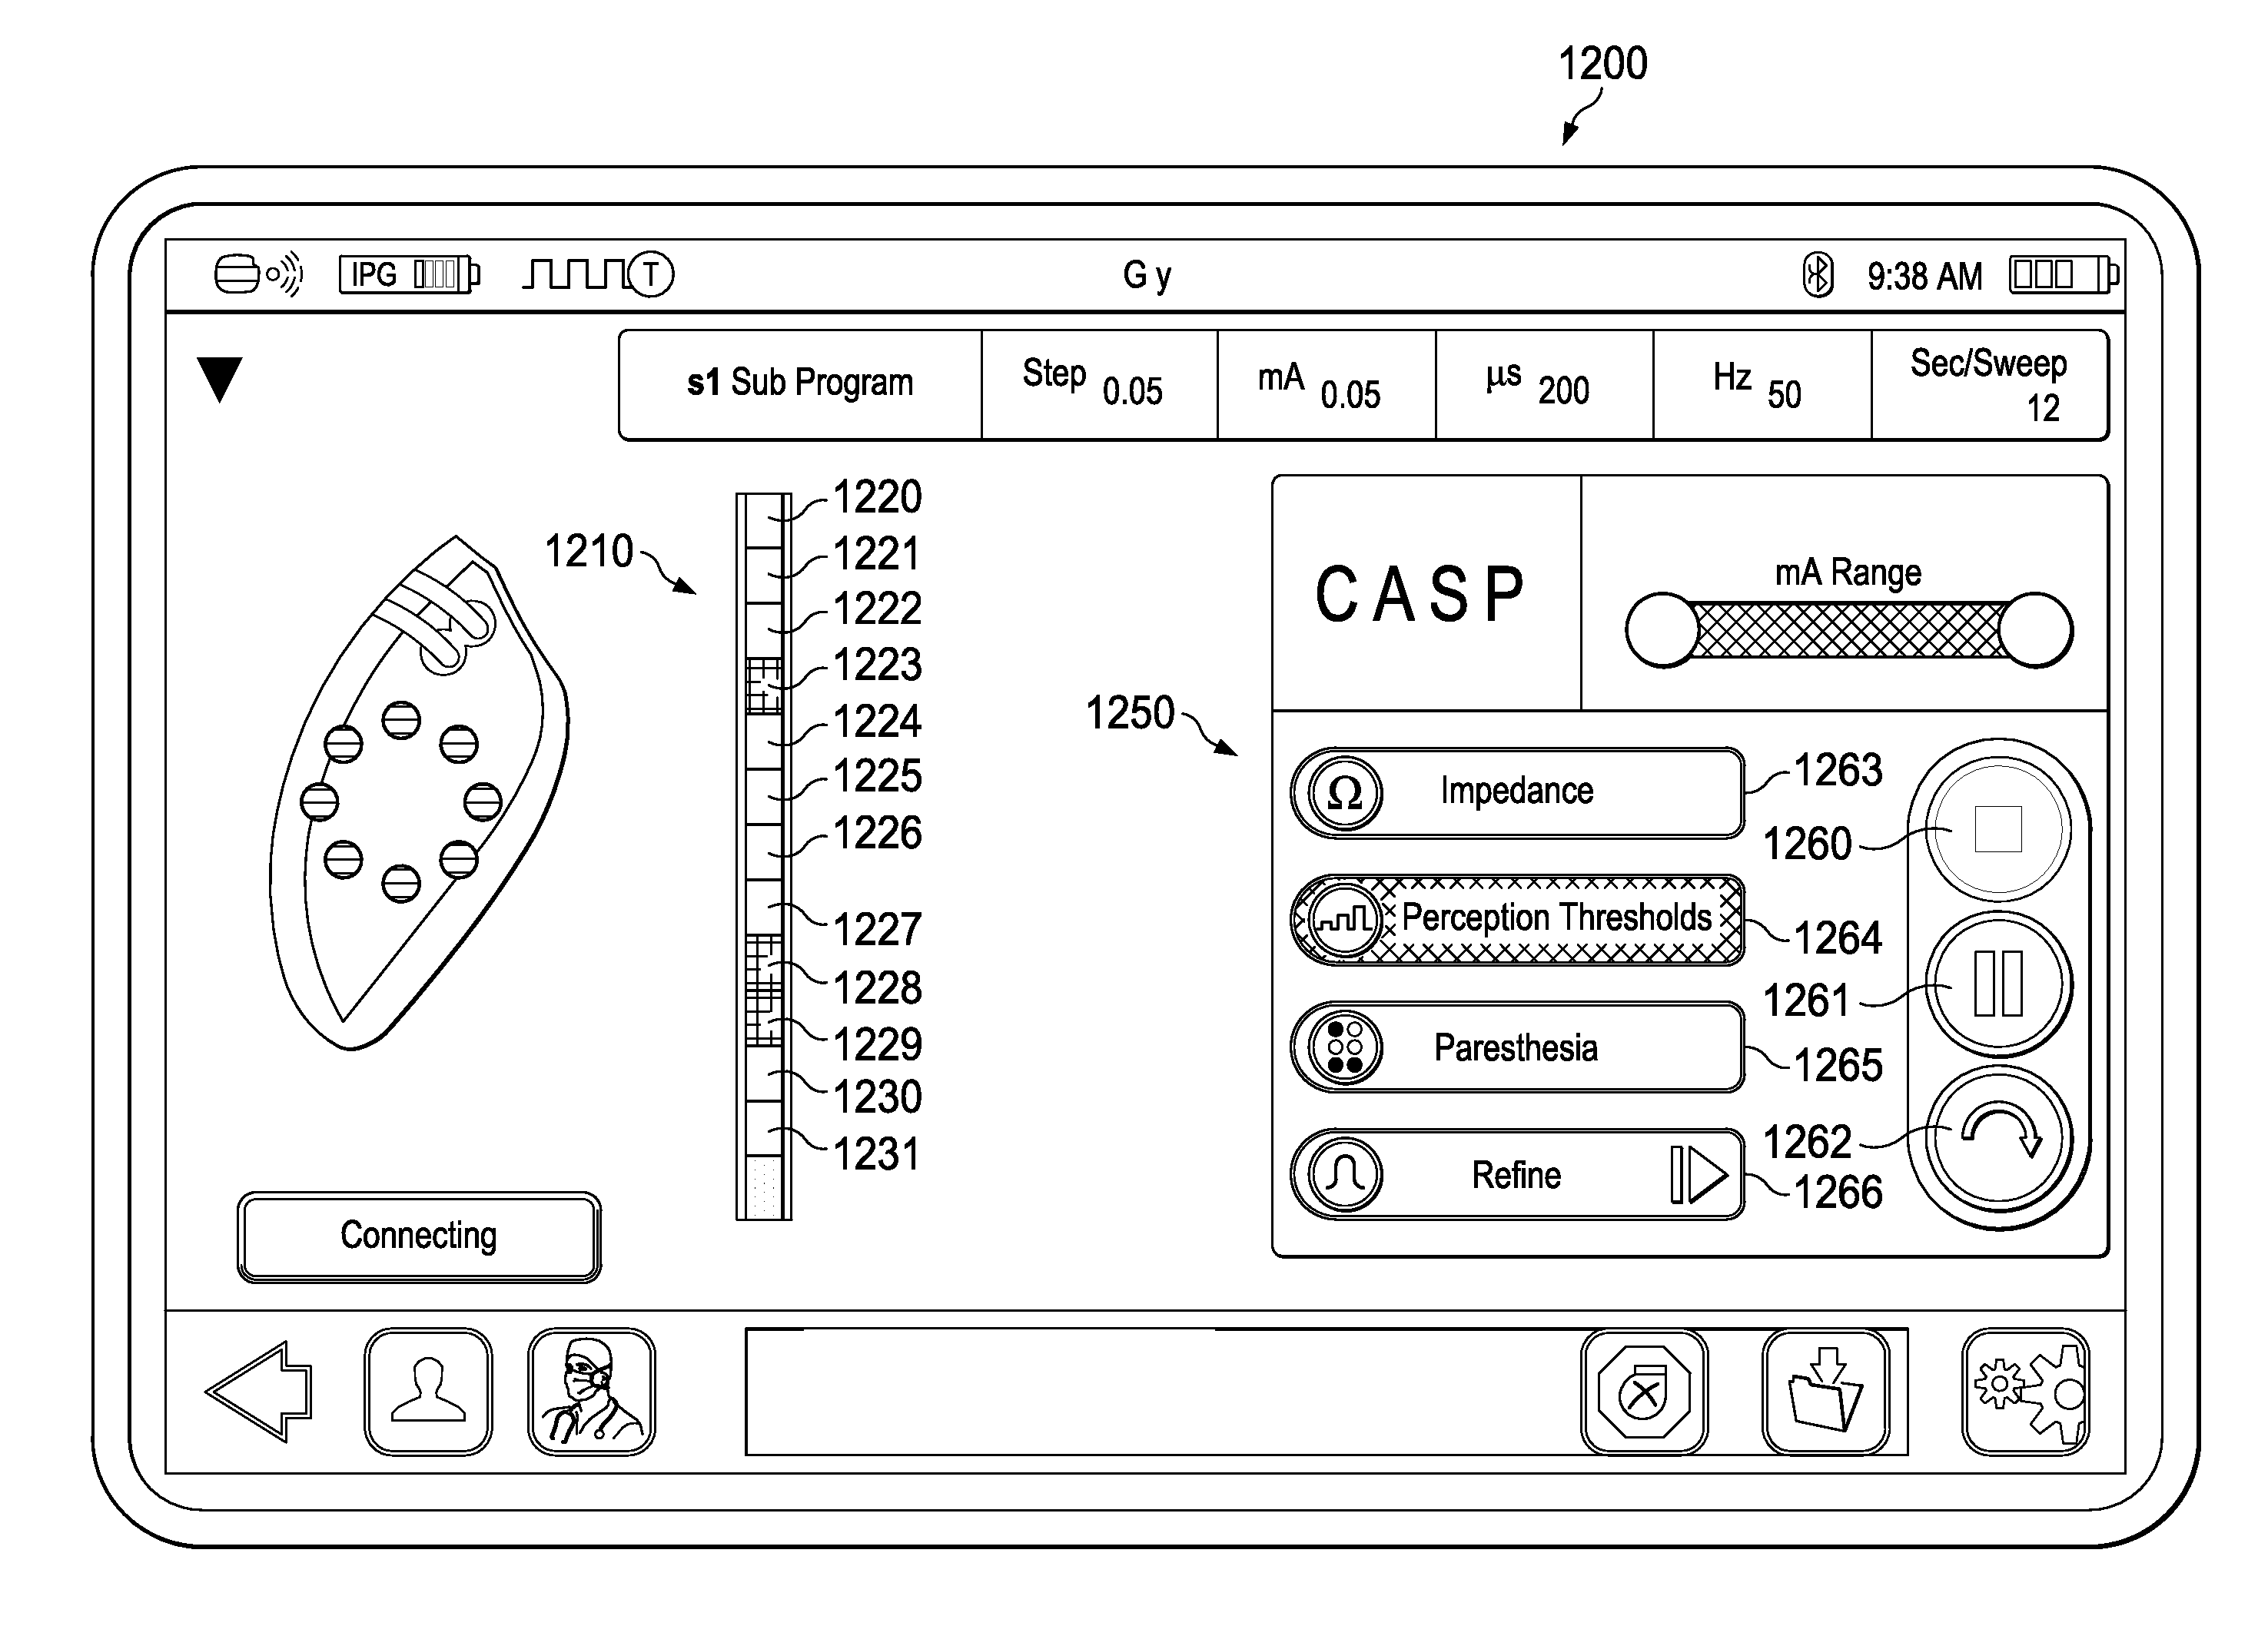 System and method of providing computer assisted stimulation programming (CASP)